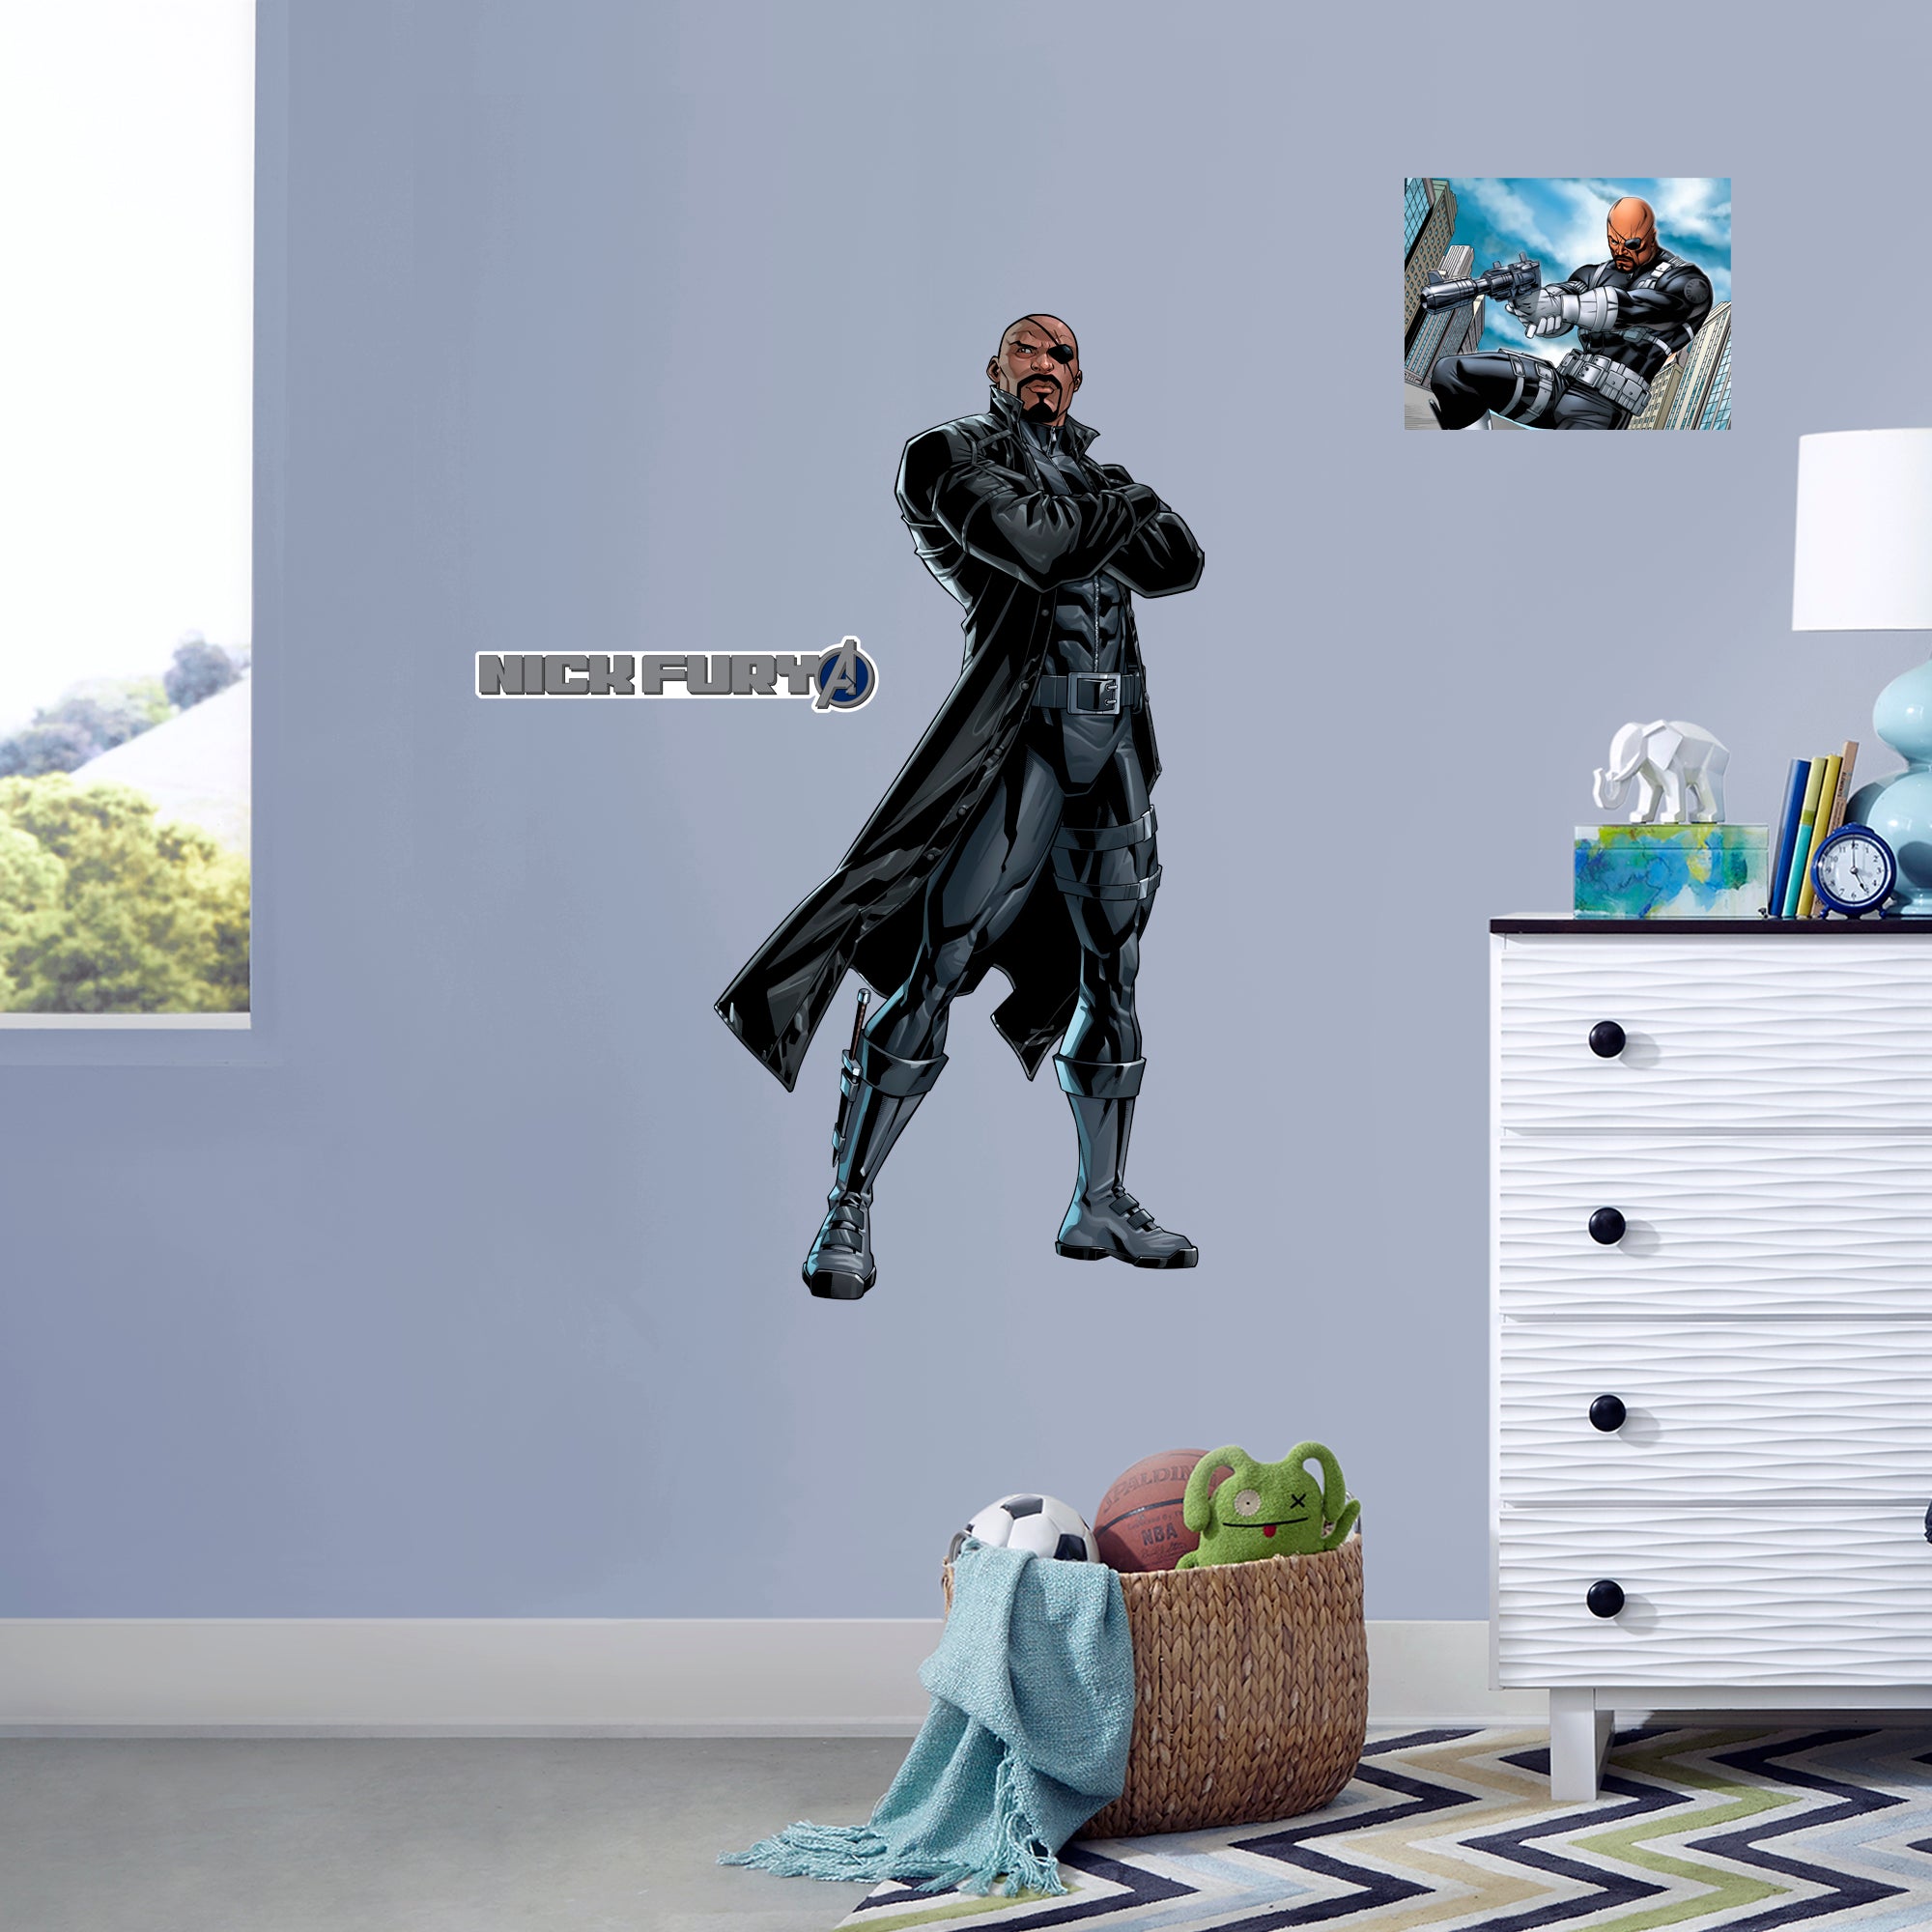 Nick Fury: Avengers Core - Officially Licensed Removable Wall Decal Giant Character + 2 Decals (25"W x 51"H) by Fathead | Vinyl